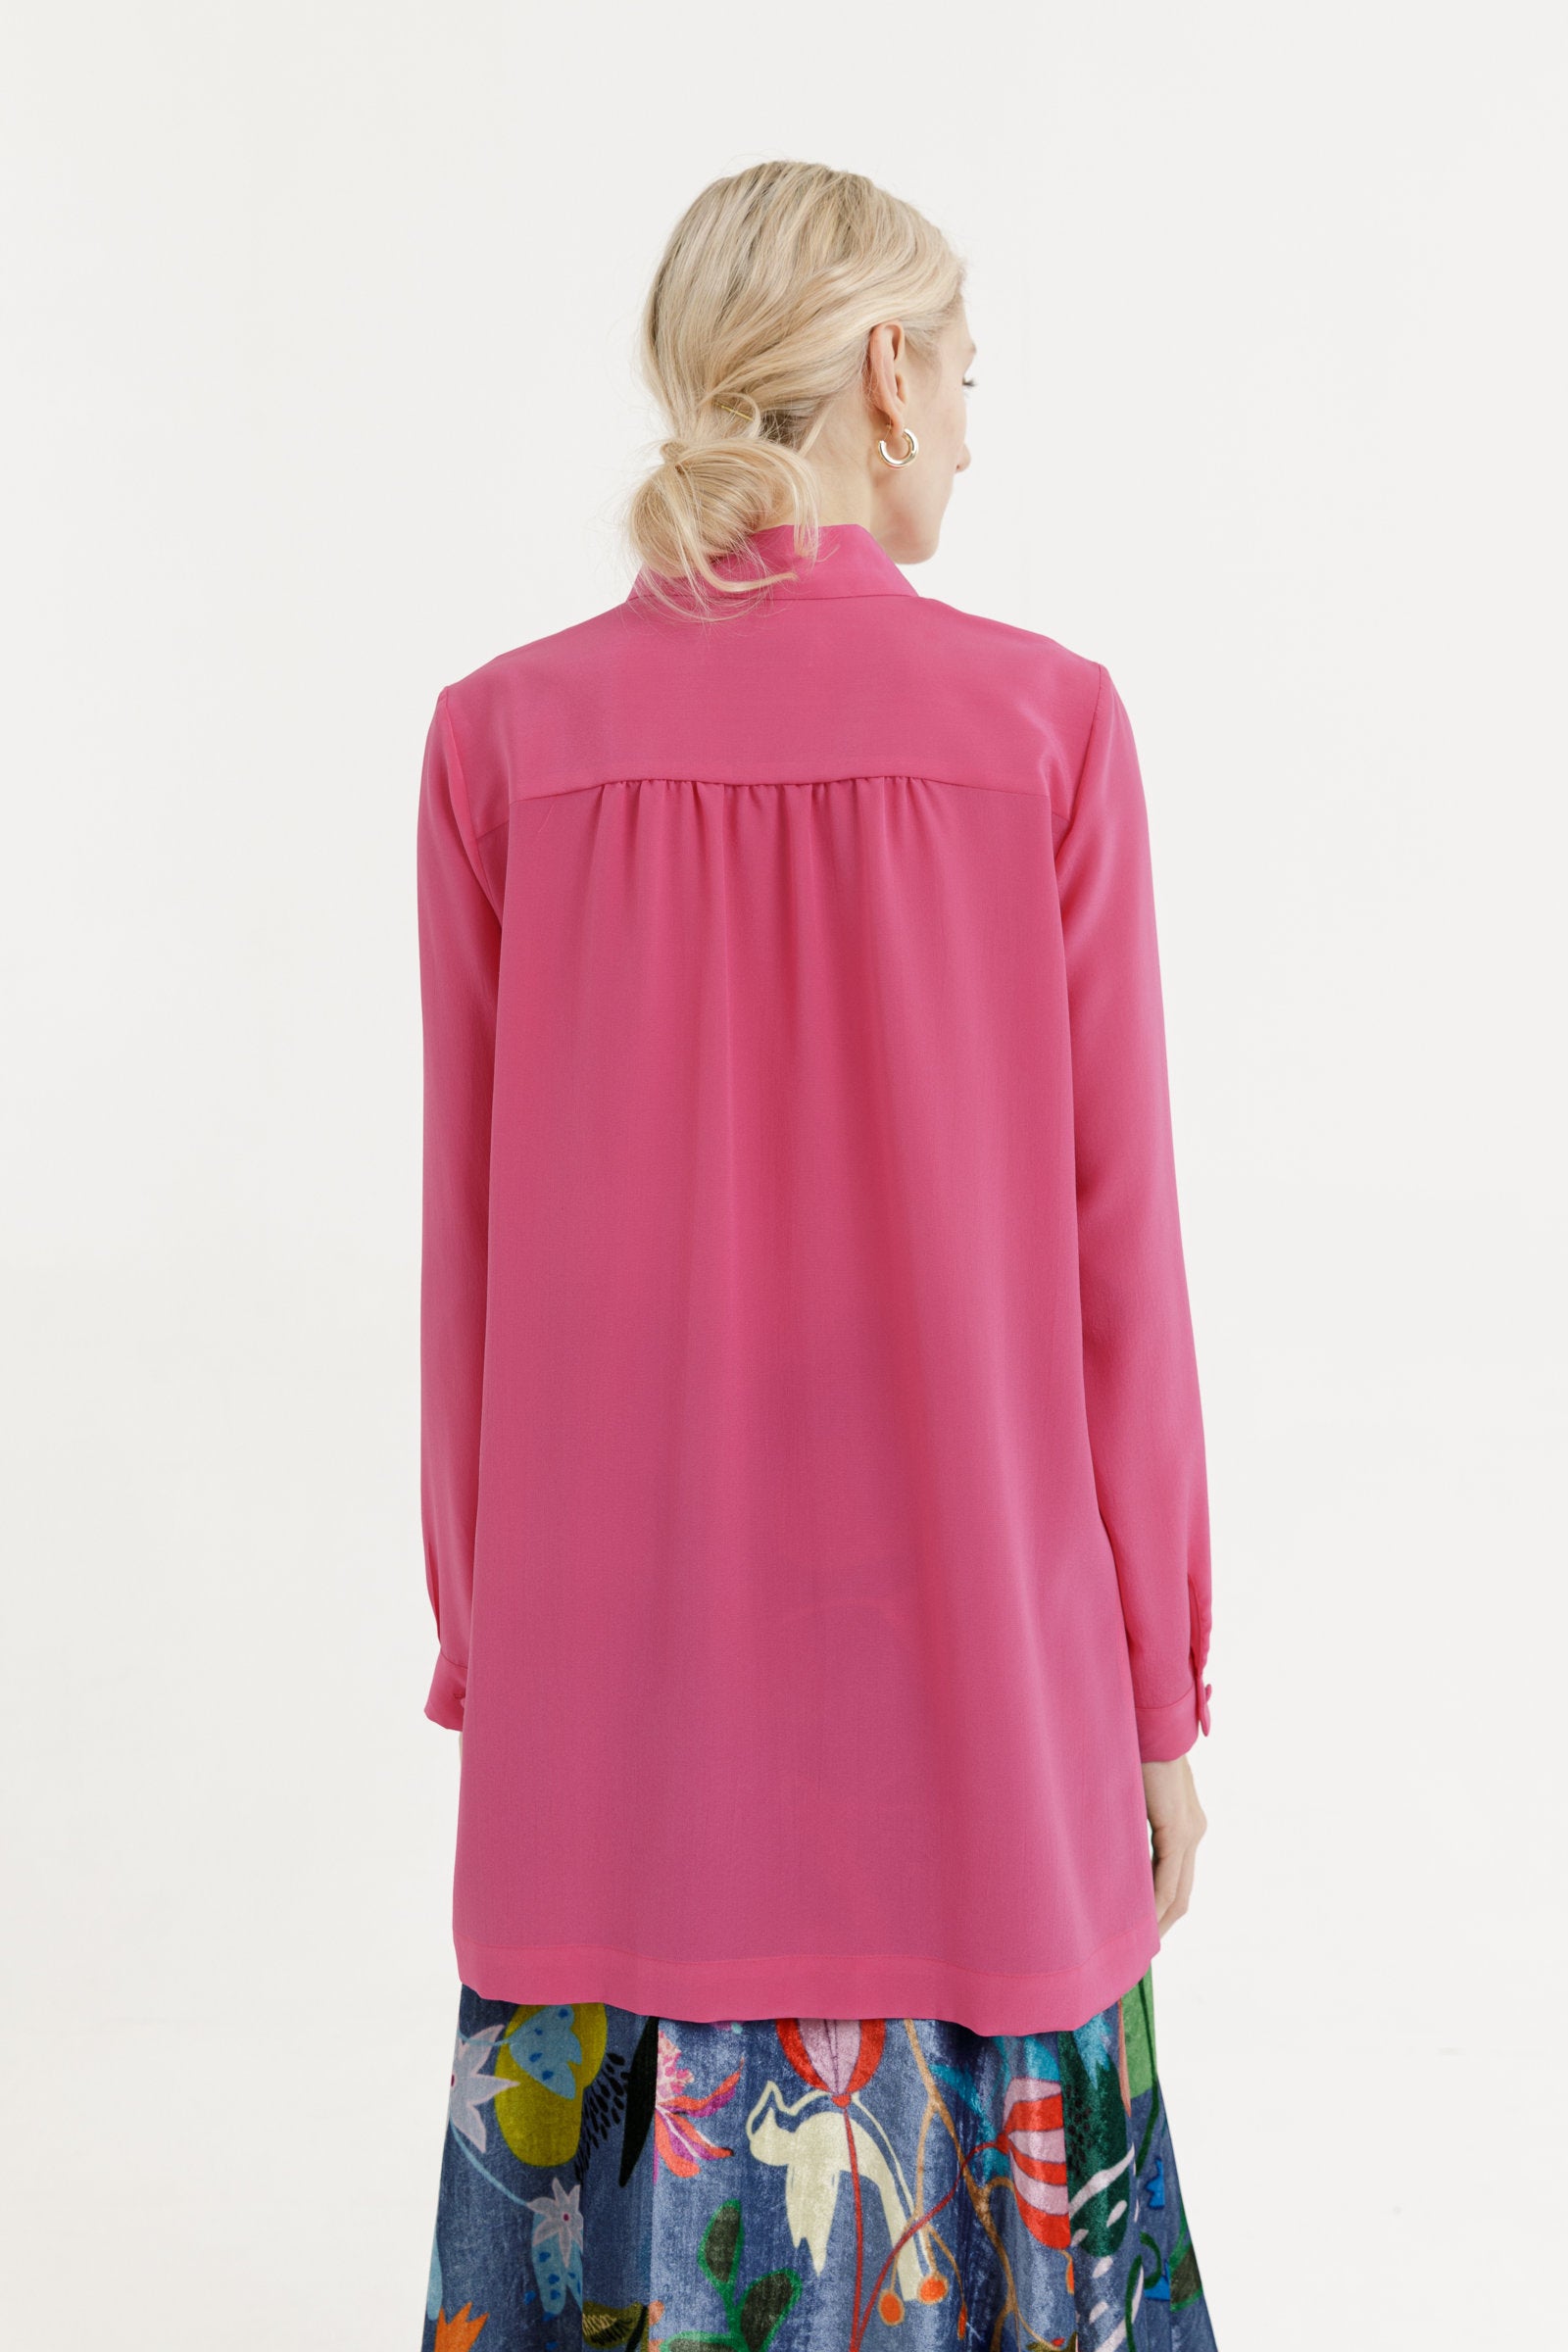 Wide asymmetrical shirt with yoke and gathering on the back.